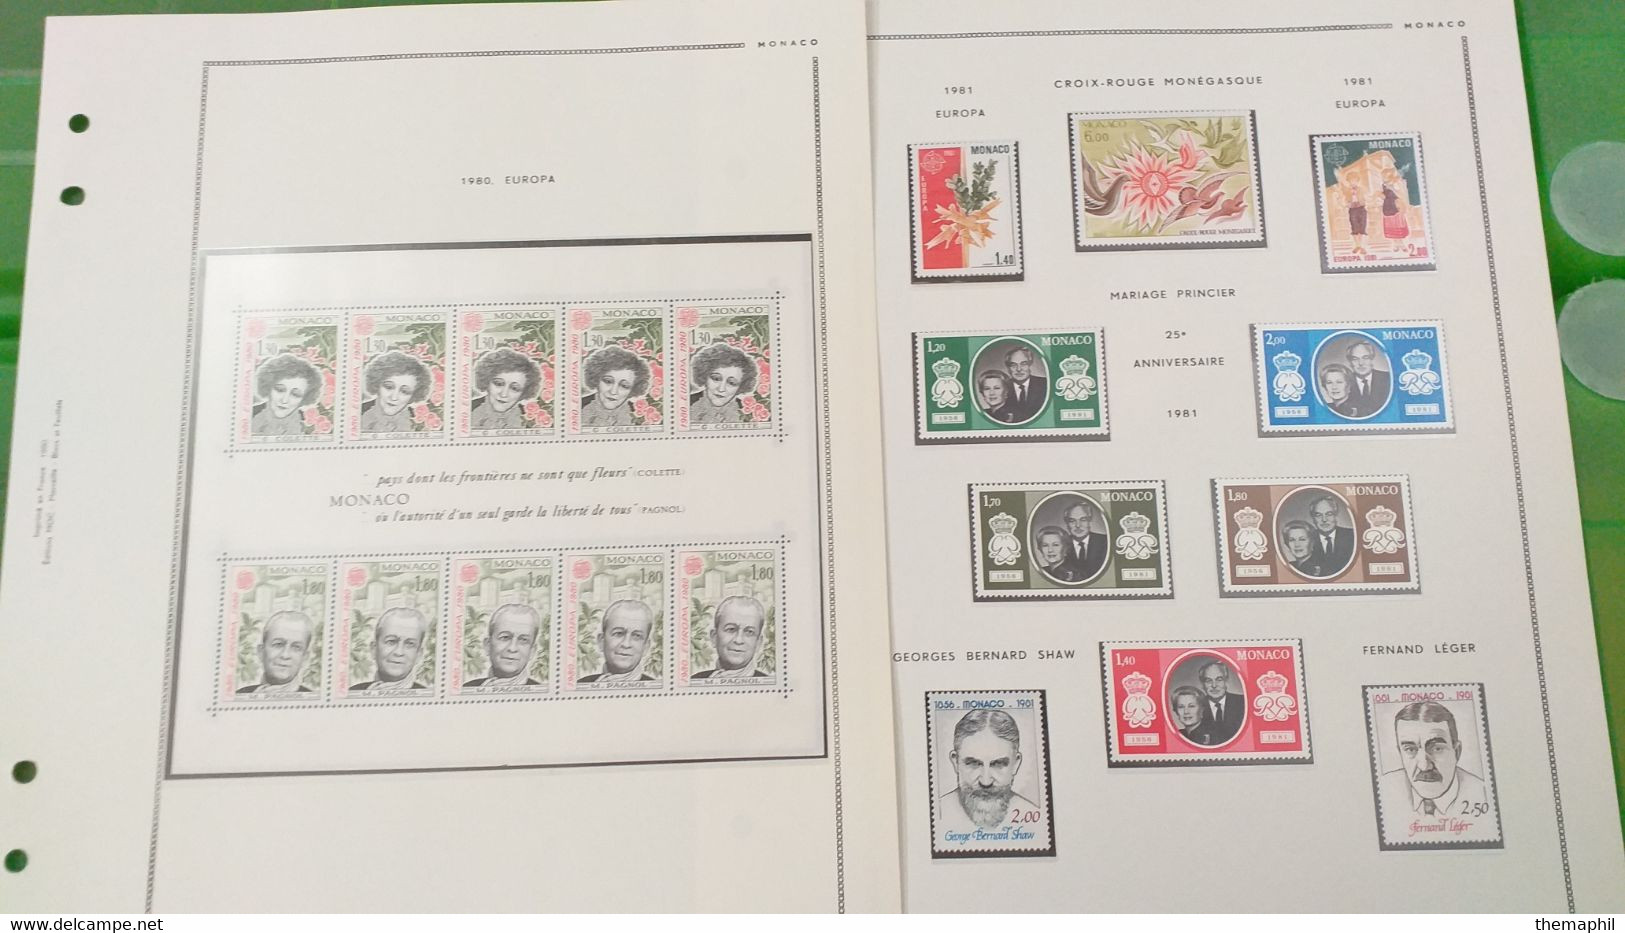 lot n° TH 635  MONACO collection de timbres neufs xx periode 1975 / 1982